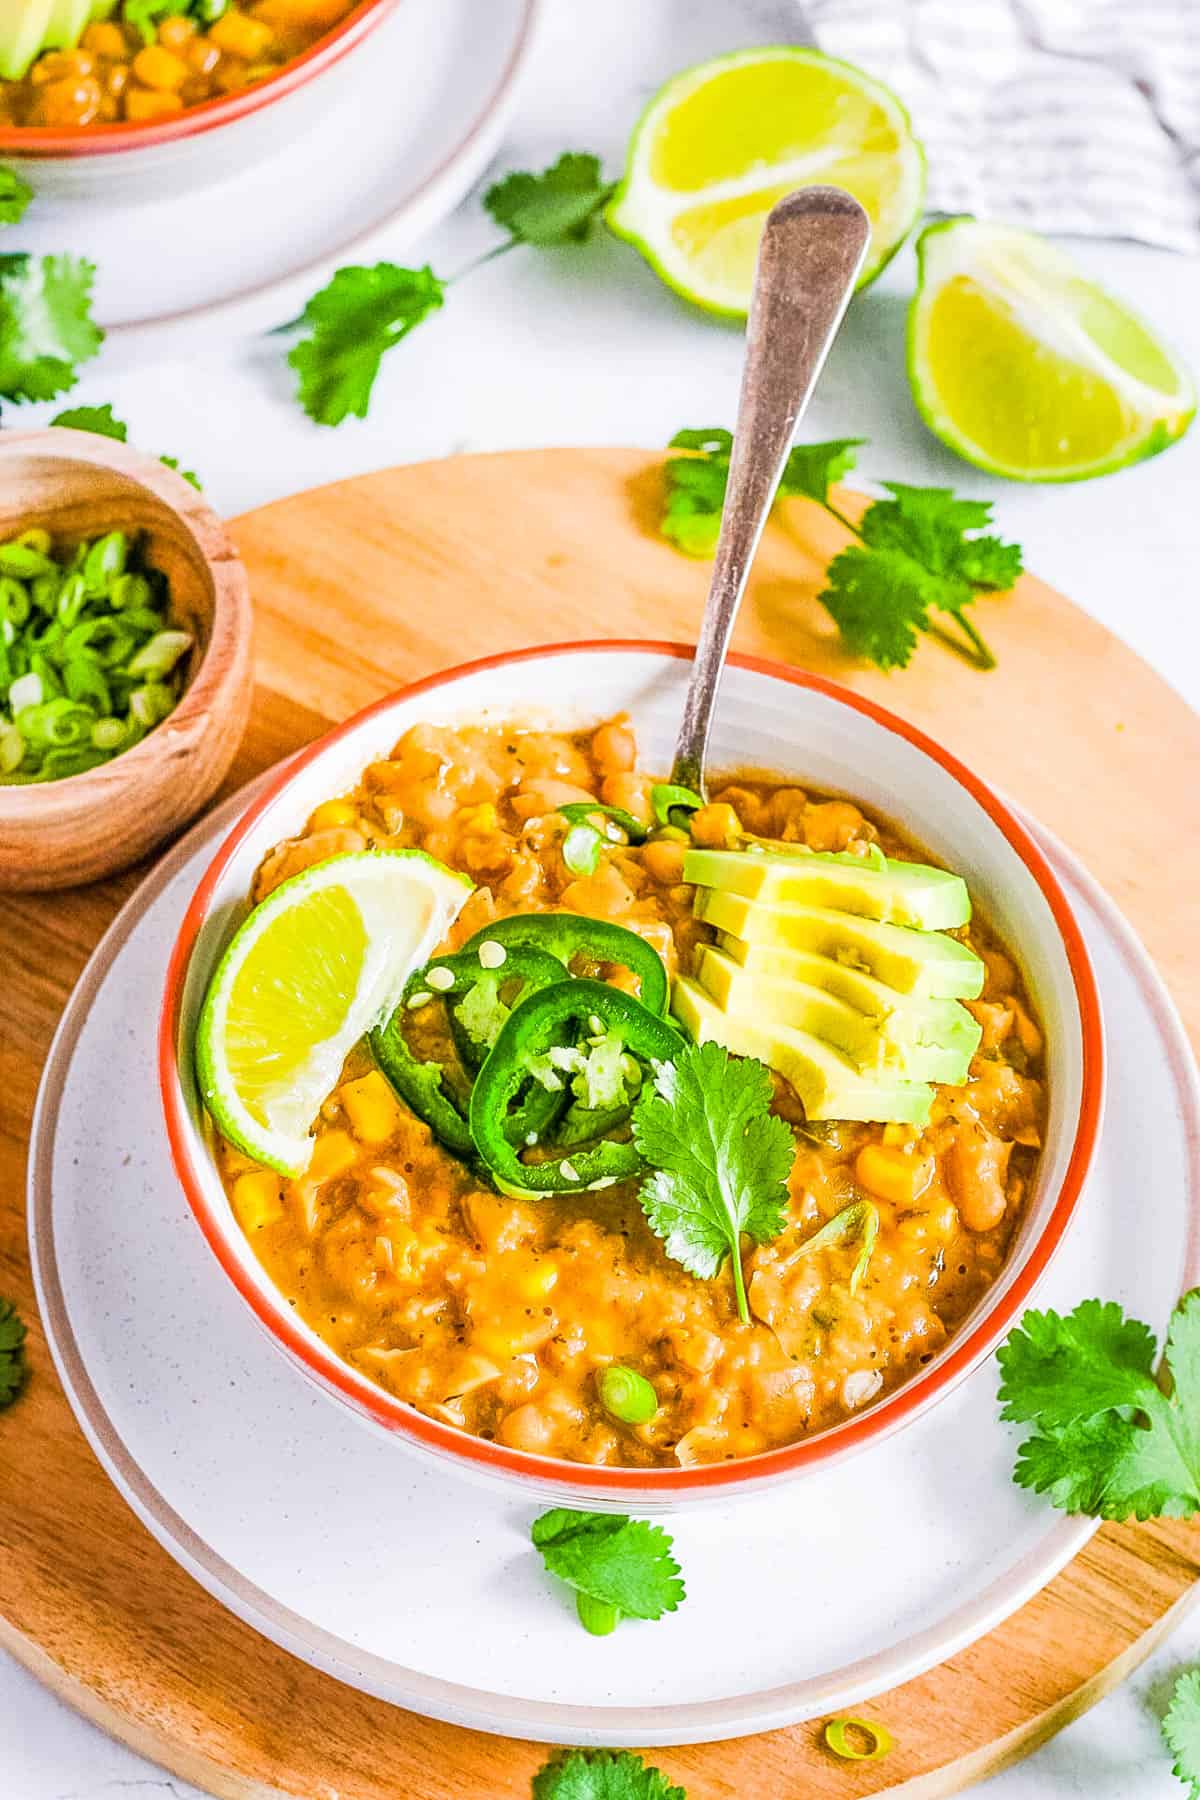 Vegan white bean chili topped with avocado, jalapeno slices and lime in a white bowl with a spoon.